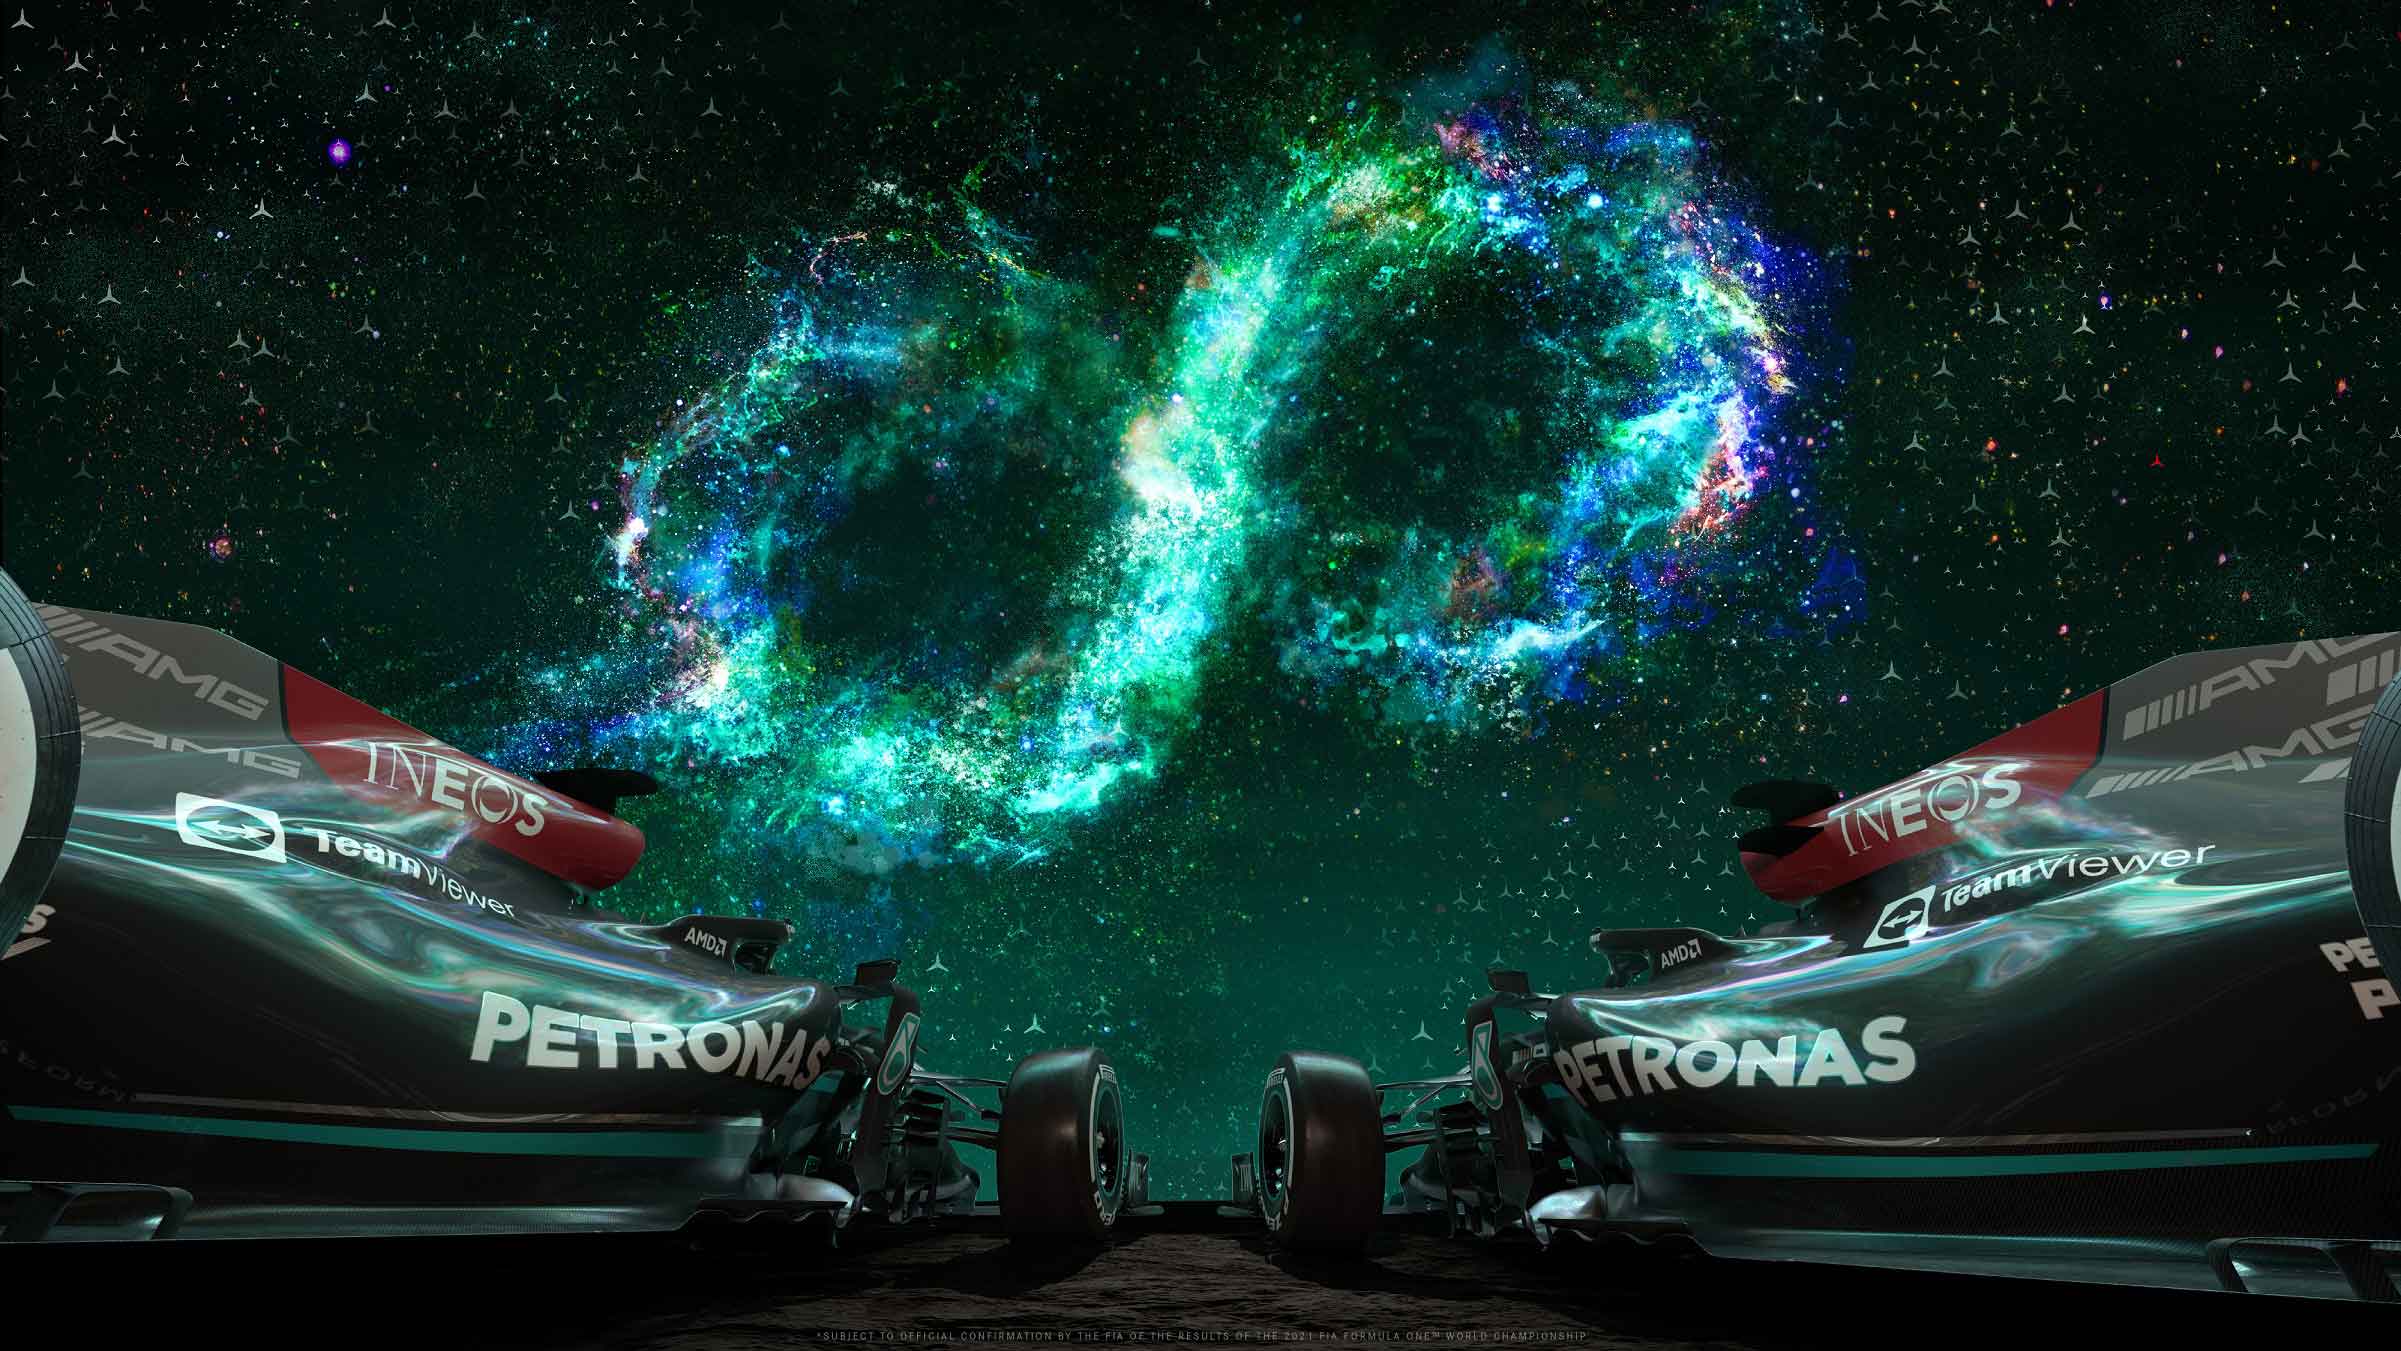 Petronas’ Fluid Technology Solutionstm Powers The Mercedes-Amg Petronas Formula One Team To Its Eighth Win